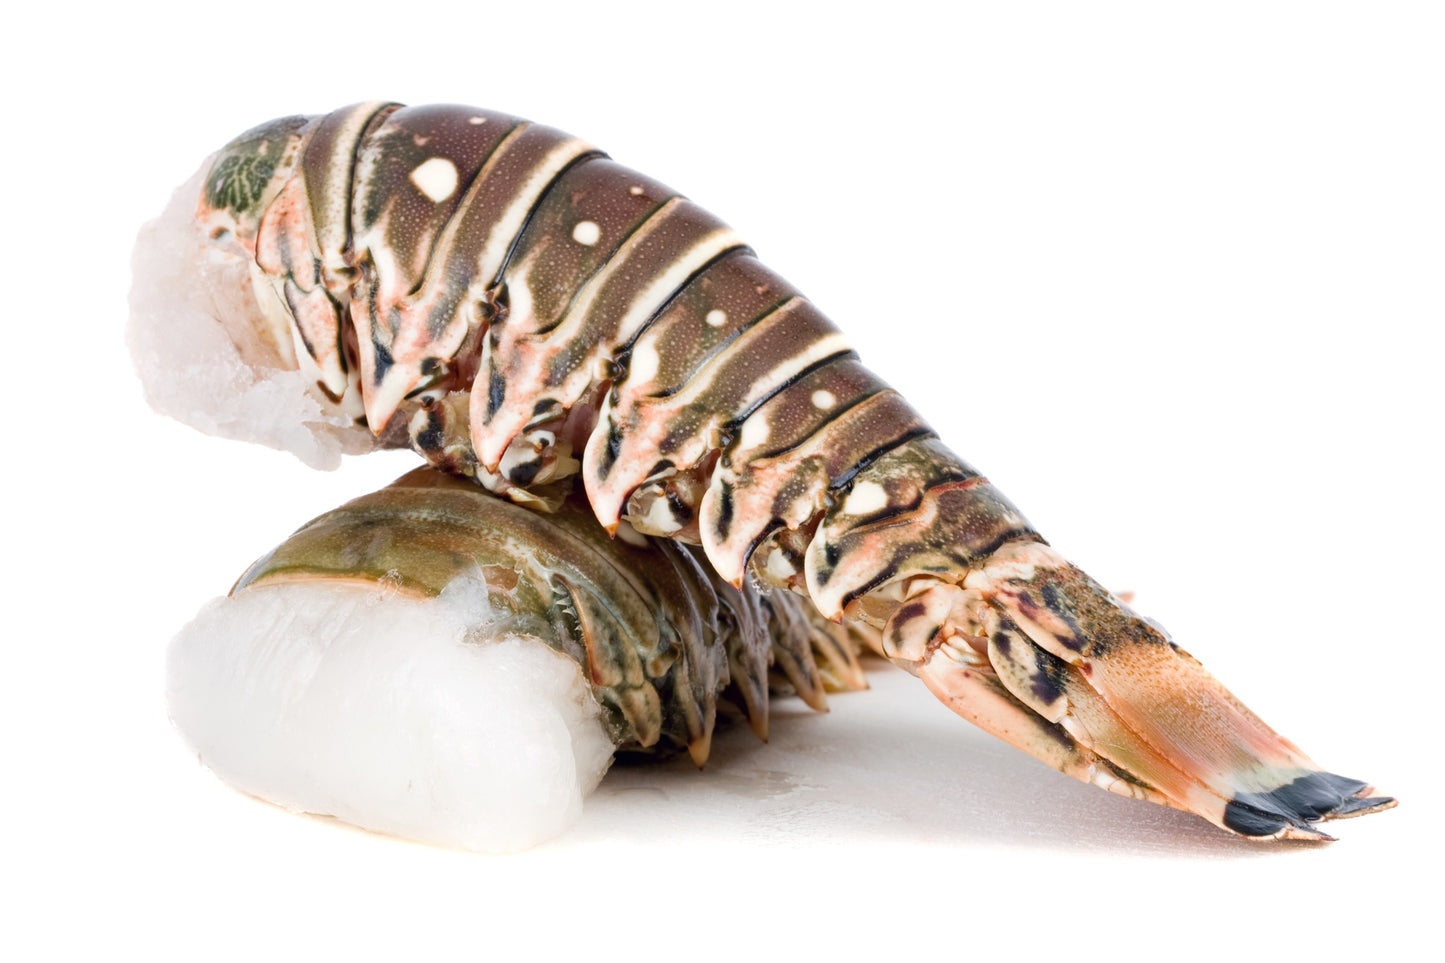 Wild Giant Rock Lobster Tails